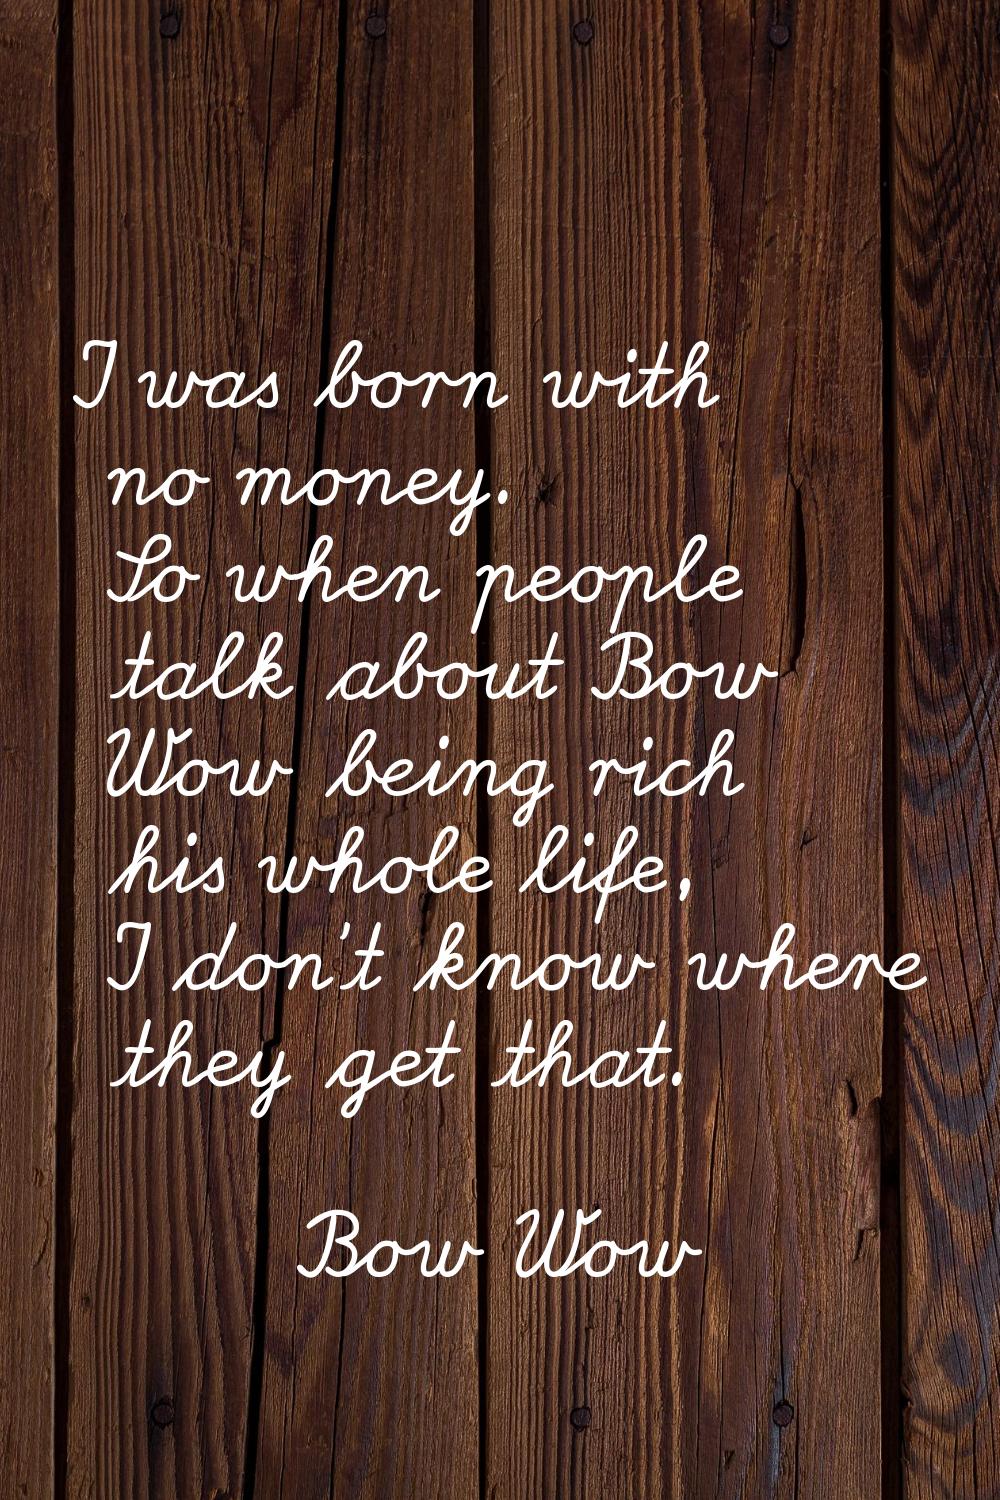 I was born with no money. So when people talk about Bow Wow being rich his whole life, I don't know